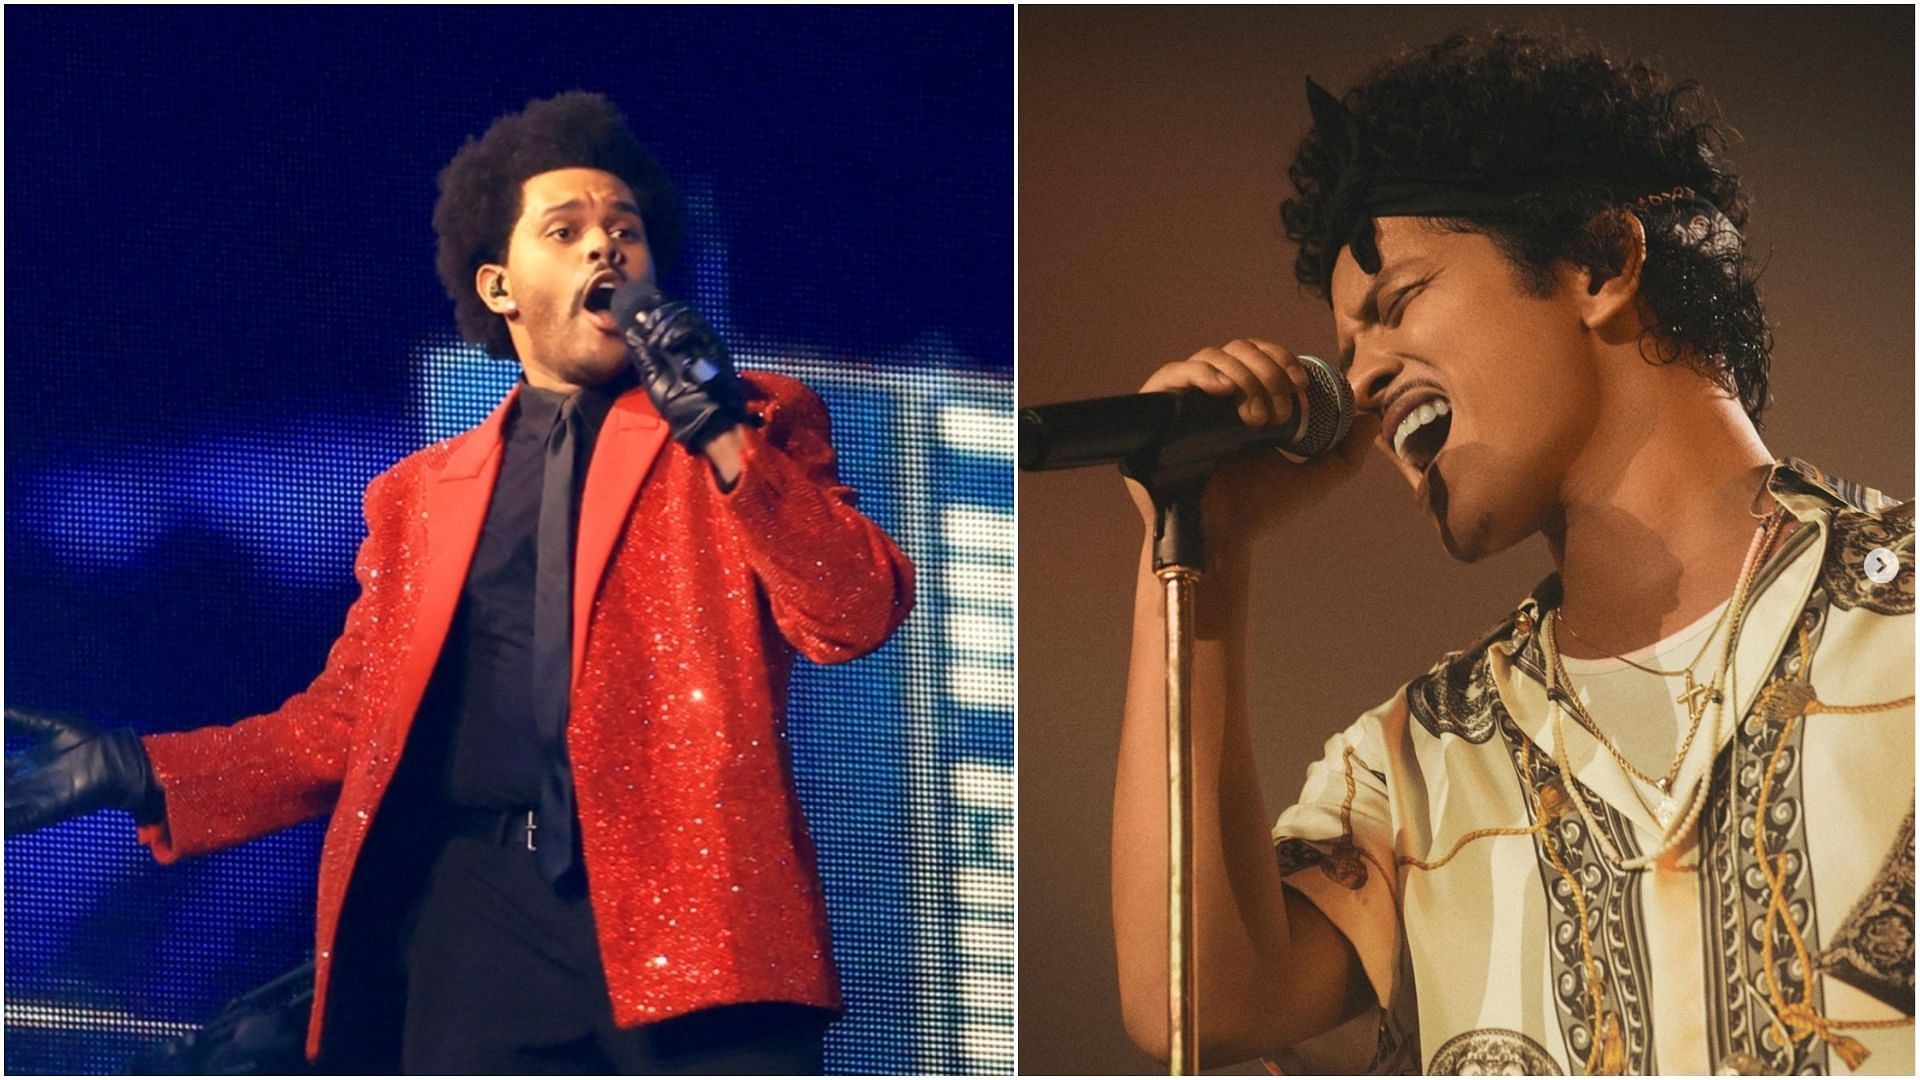 The Weeknd and Bruno Mars were among the winners at the 2022 BET Awards. (Image via Getty and Instagram)